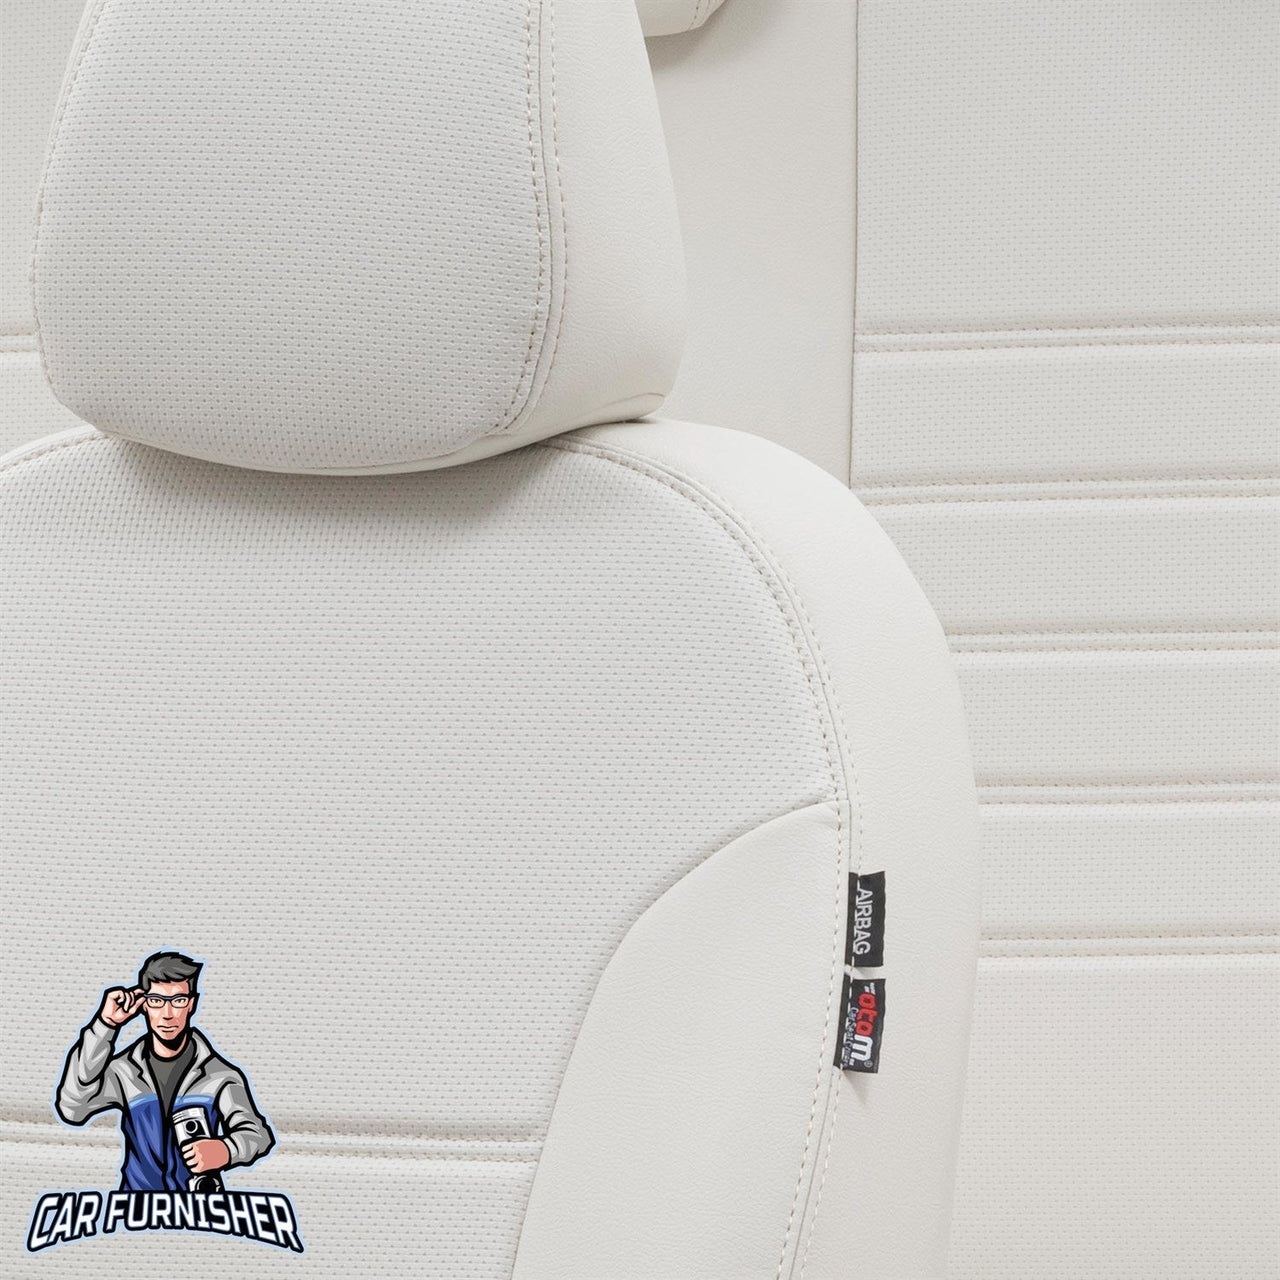 Volkswagen Touareg Seat Cover New York Leather Design Ivory Leather